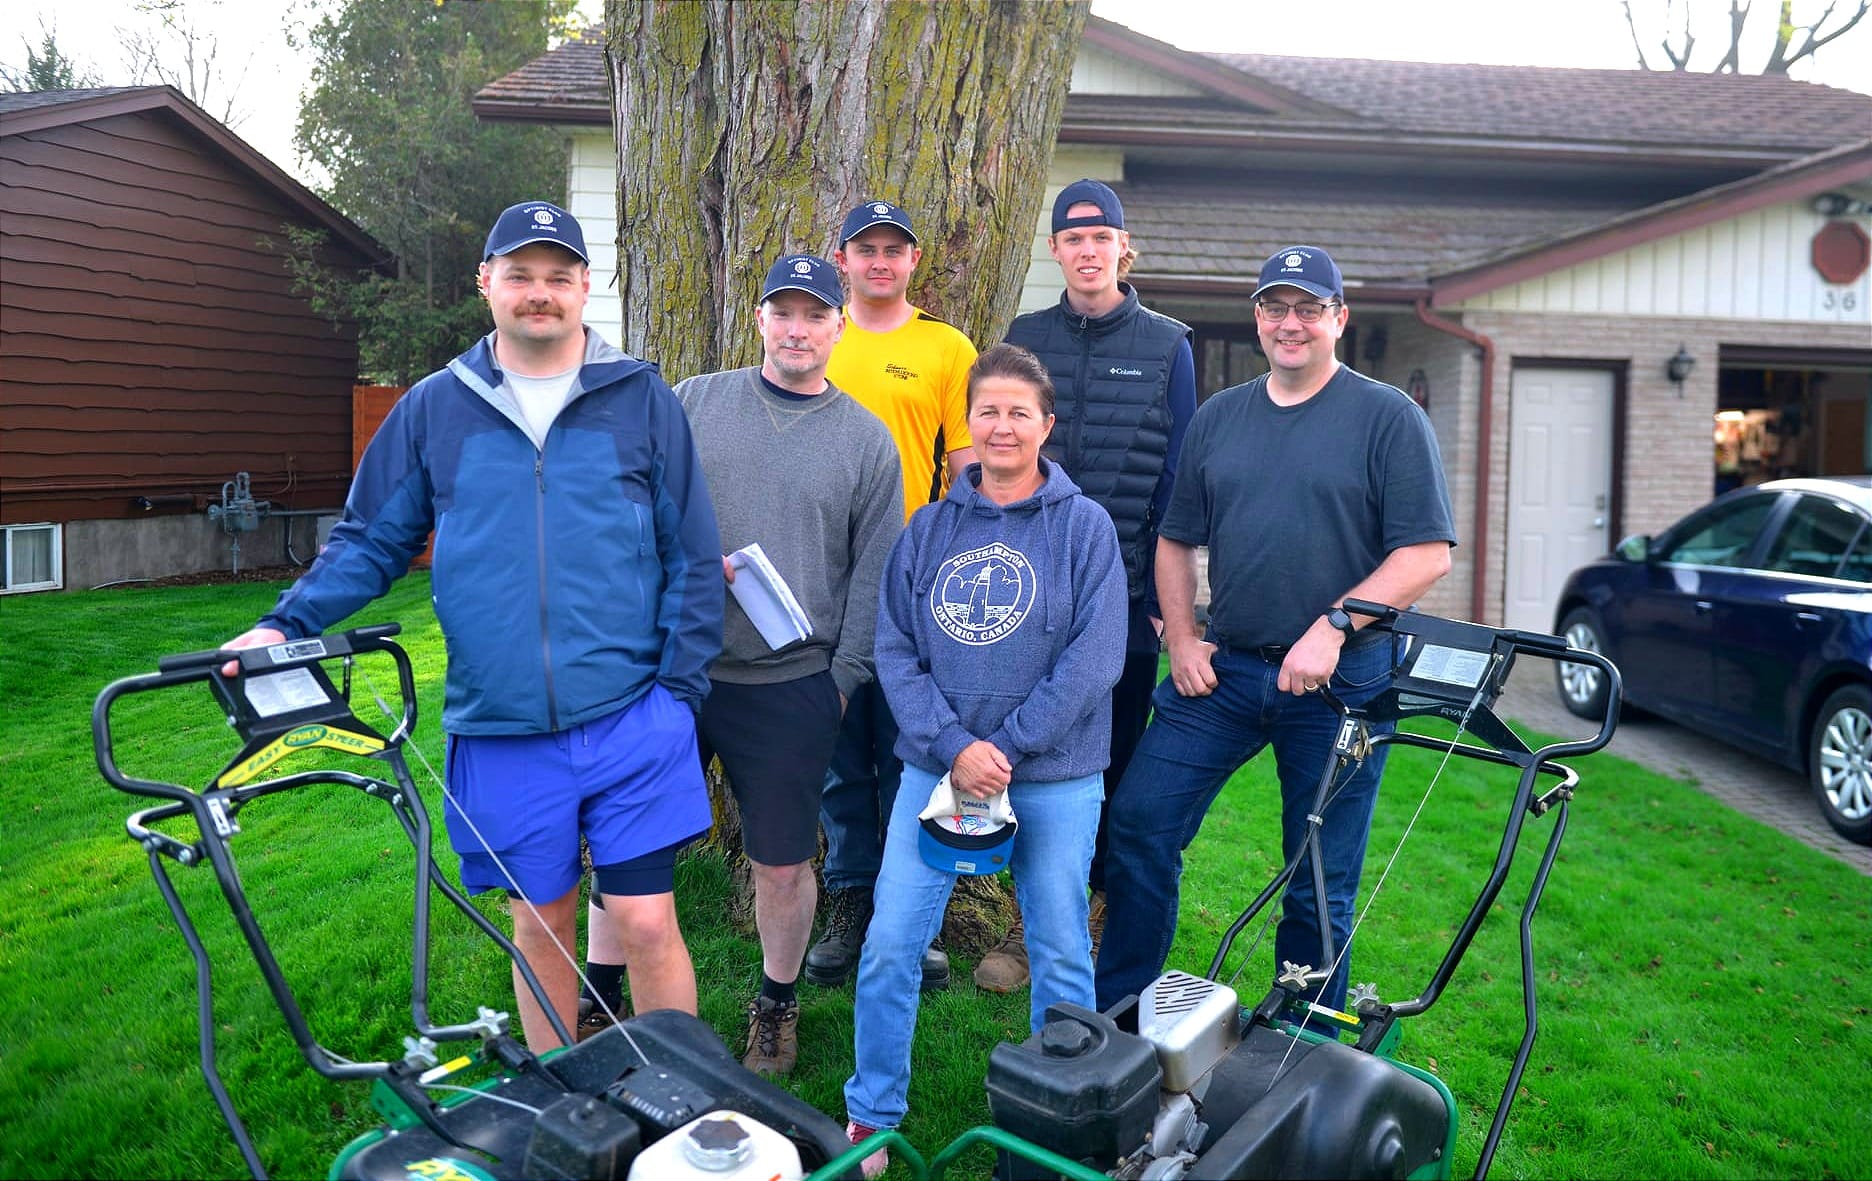 Aerating lawns is all in a day’s work for St. Jacobs Optimists